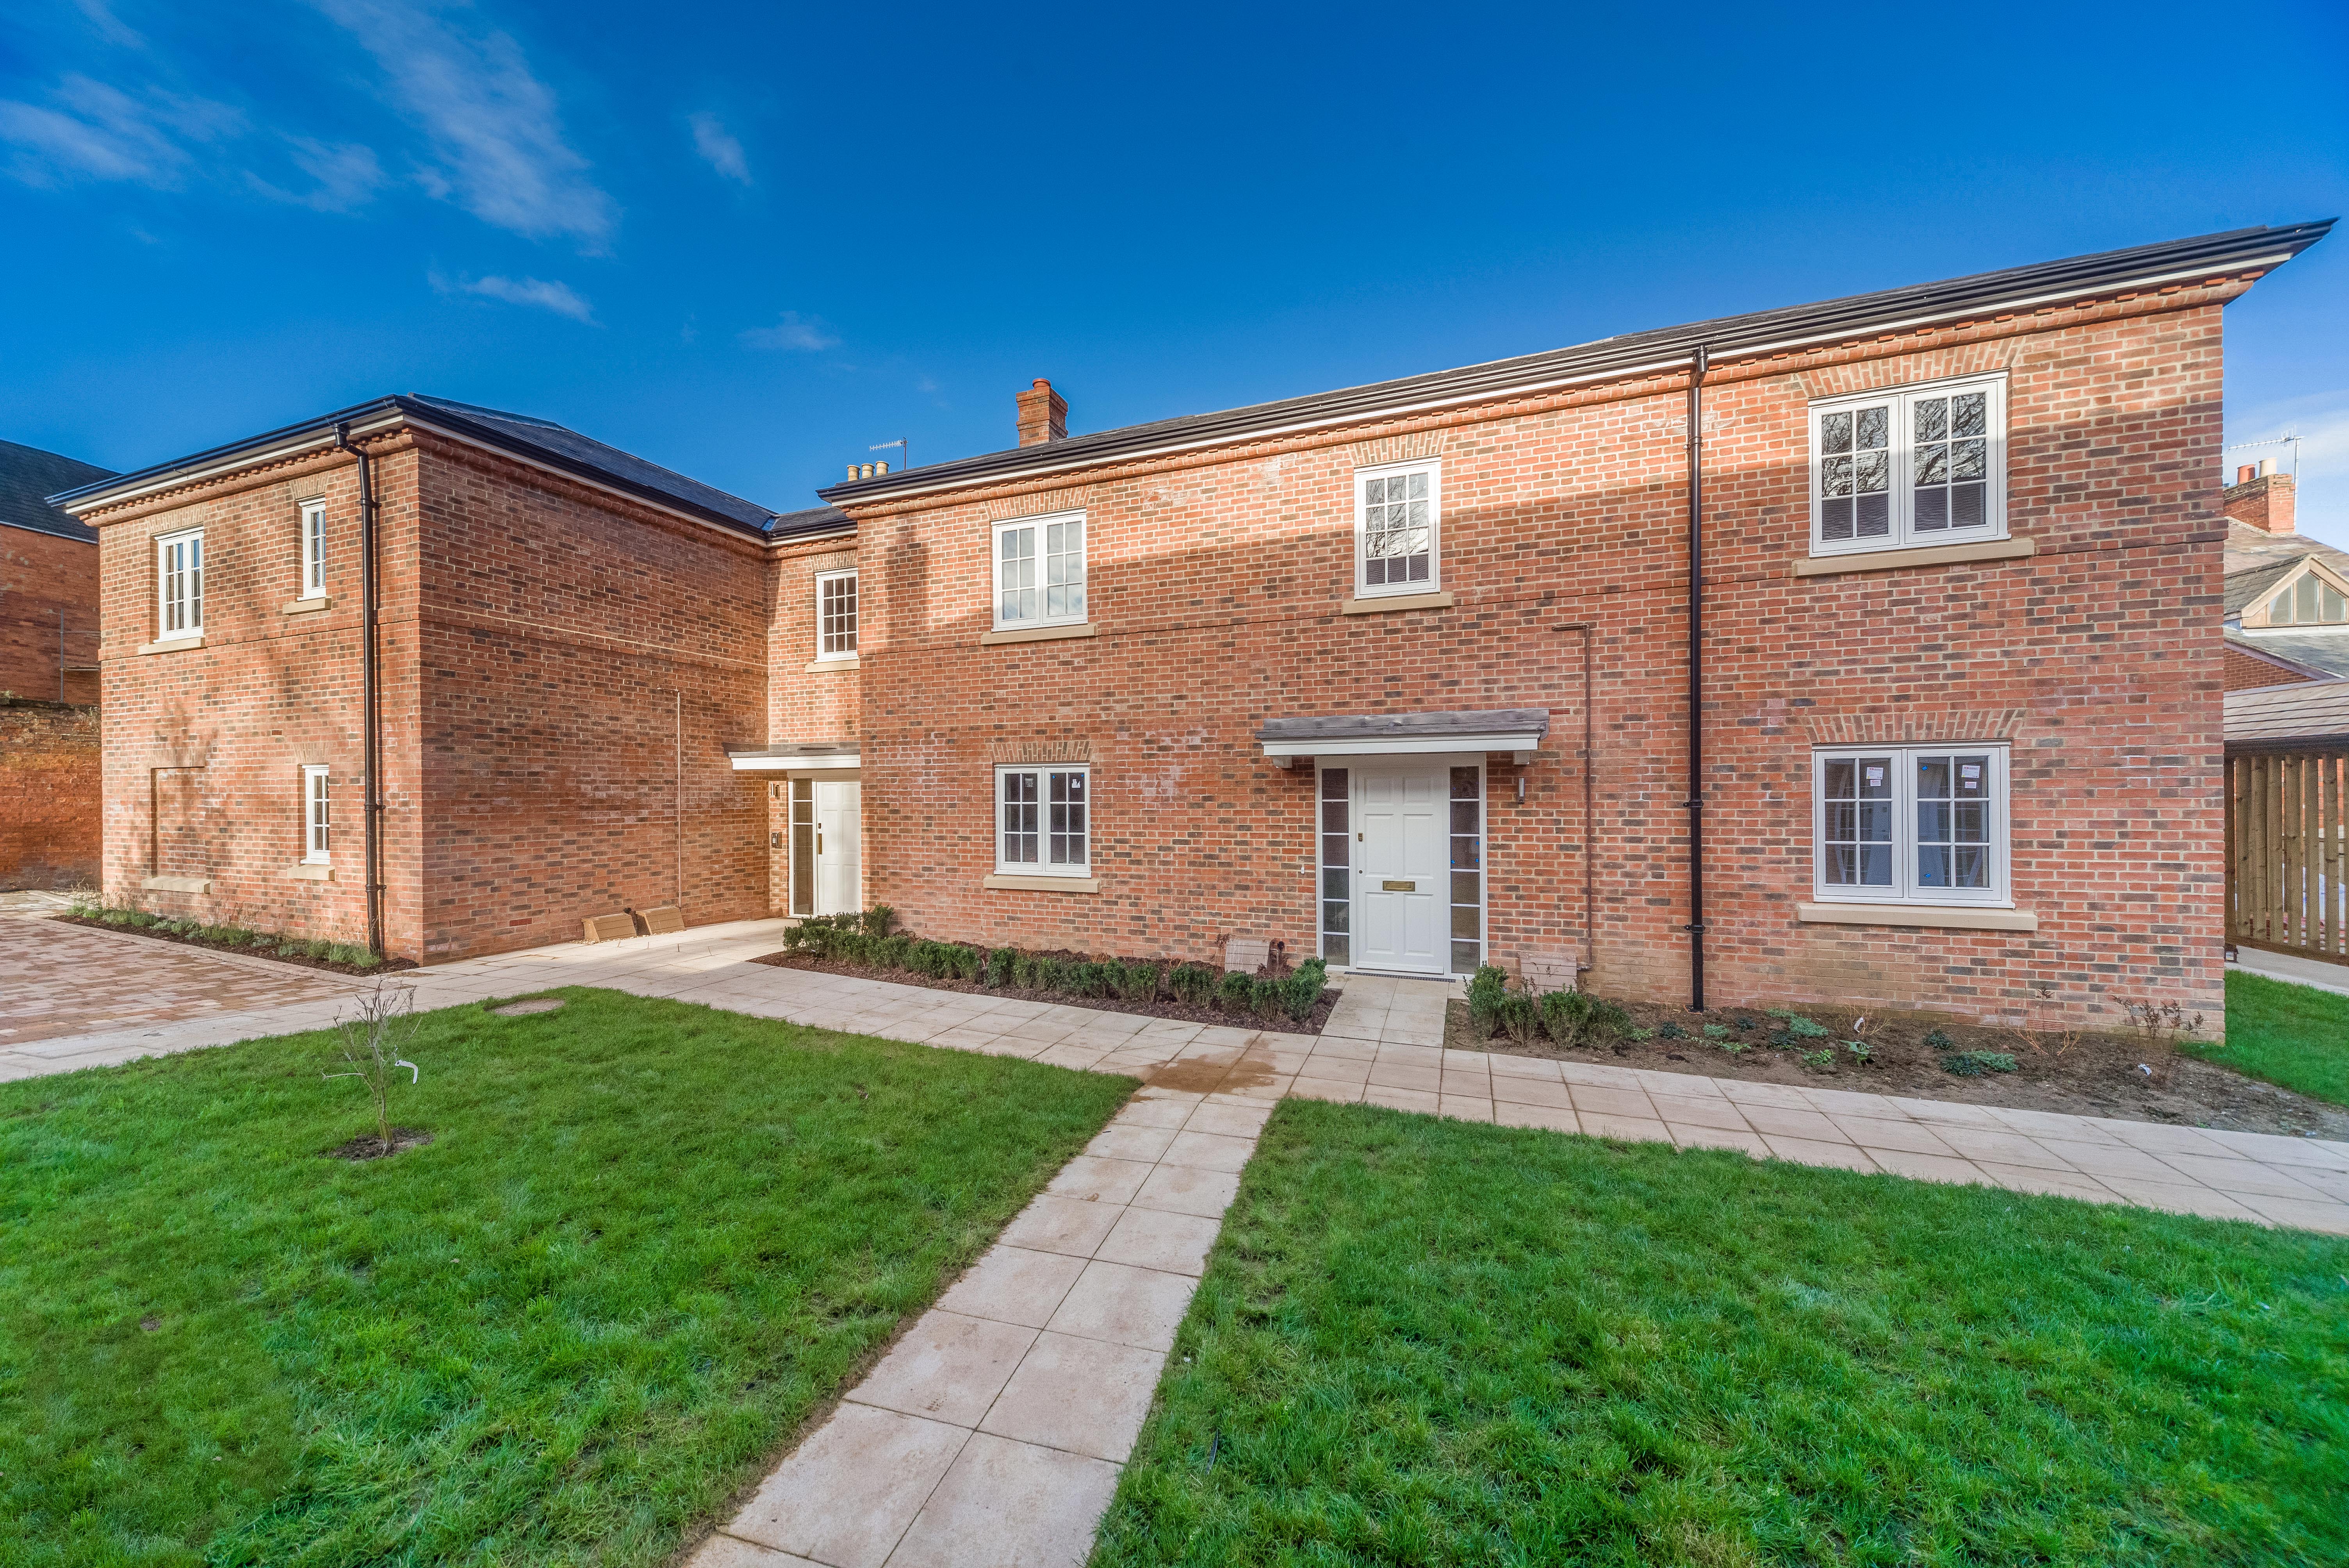 2 bed  for sale in New Road, Banbury  - Property Image 1